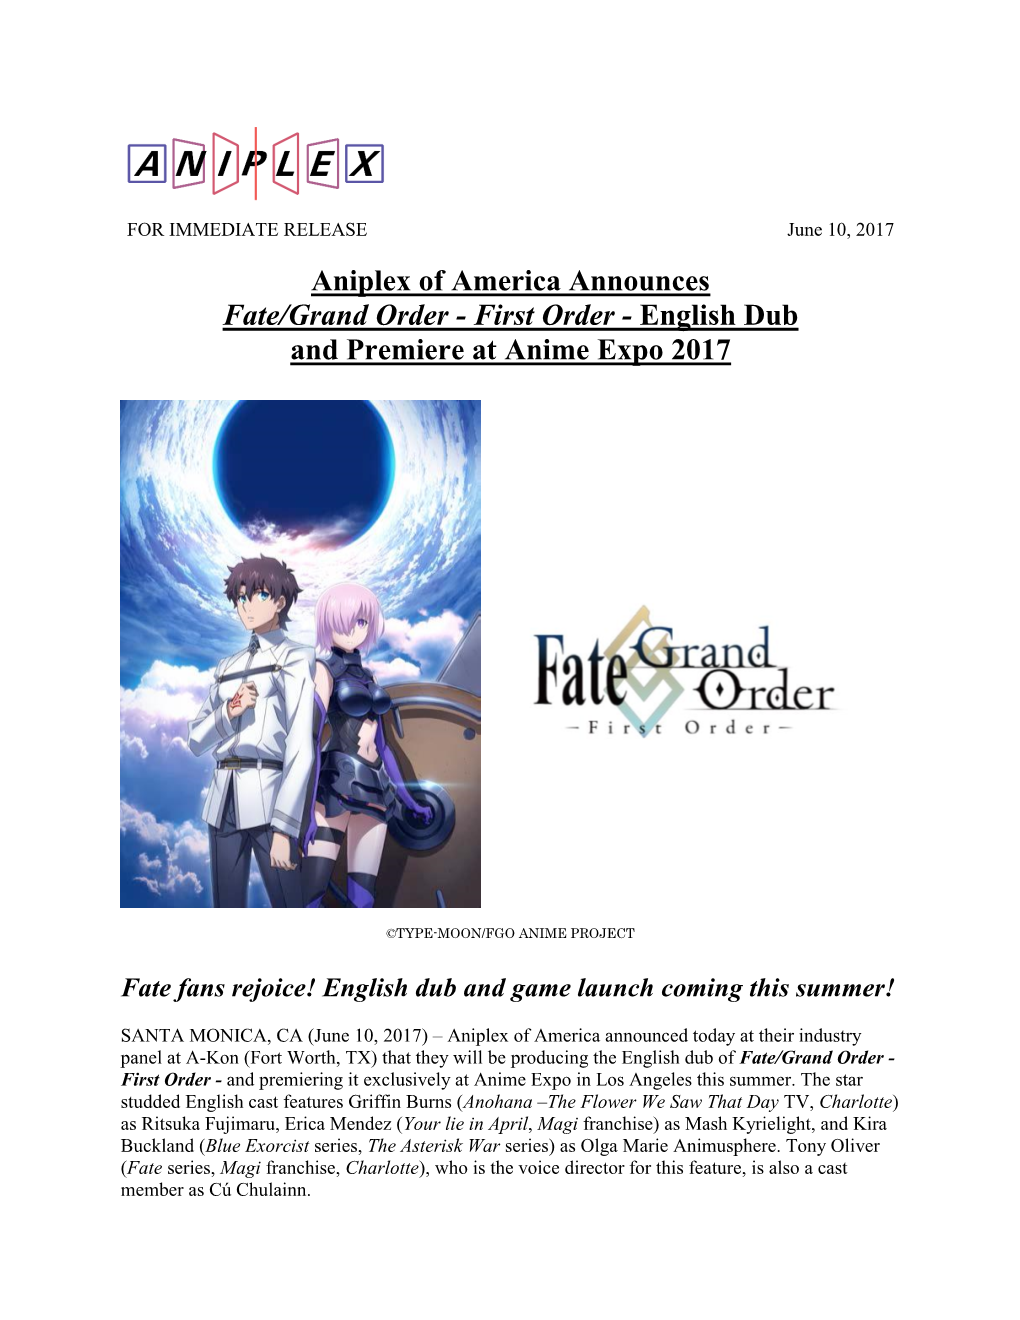 Aniplex of America Announces Fate/Grand Order - First Order - English Dub and Premiere at Anime Expo 2017